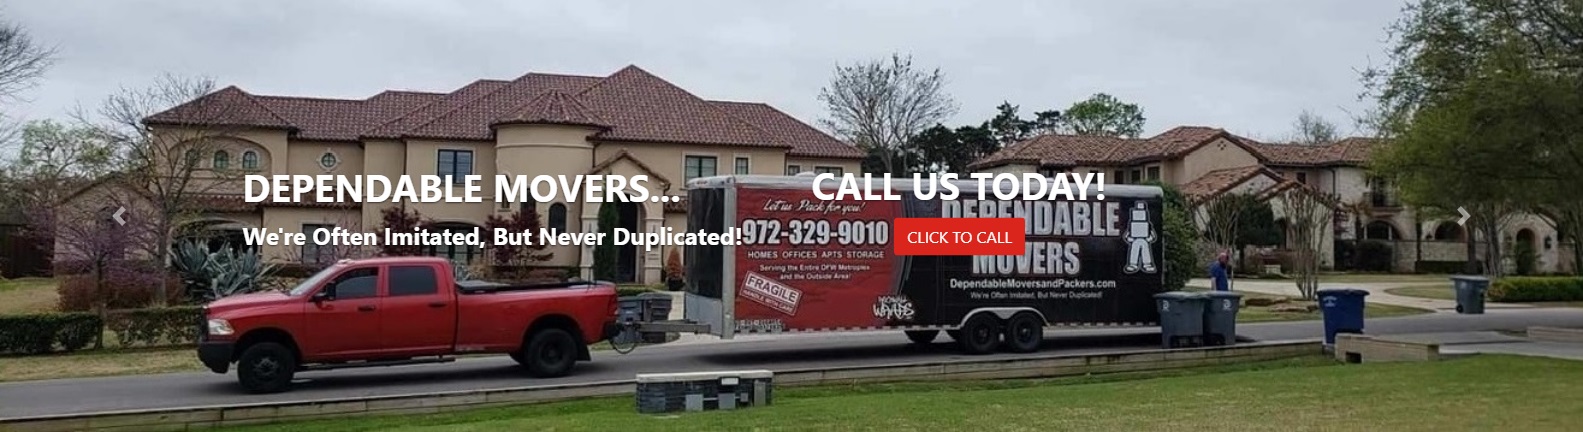 Dependable Movers Flower Mound Mover Flower Mound Moving Company - Home Office Apartment Movers Residential Commercial Movers in Flower Mound Texas